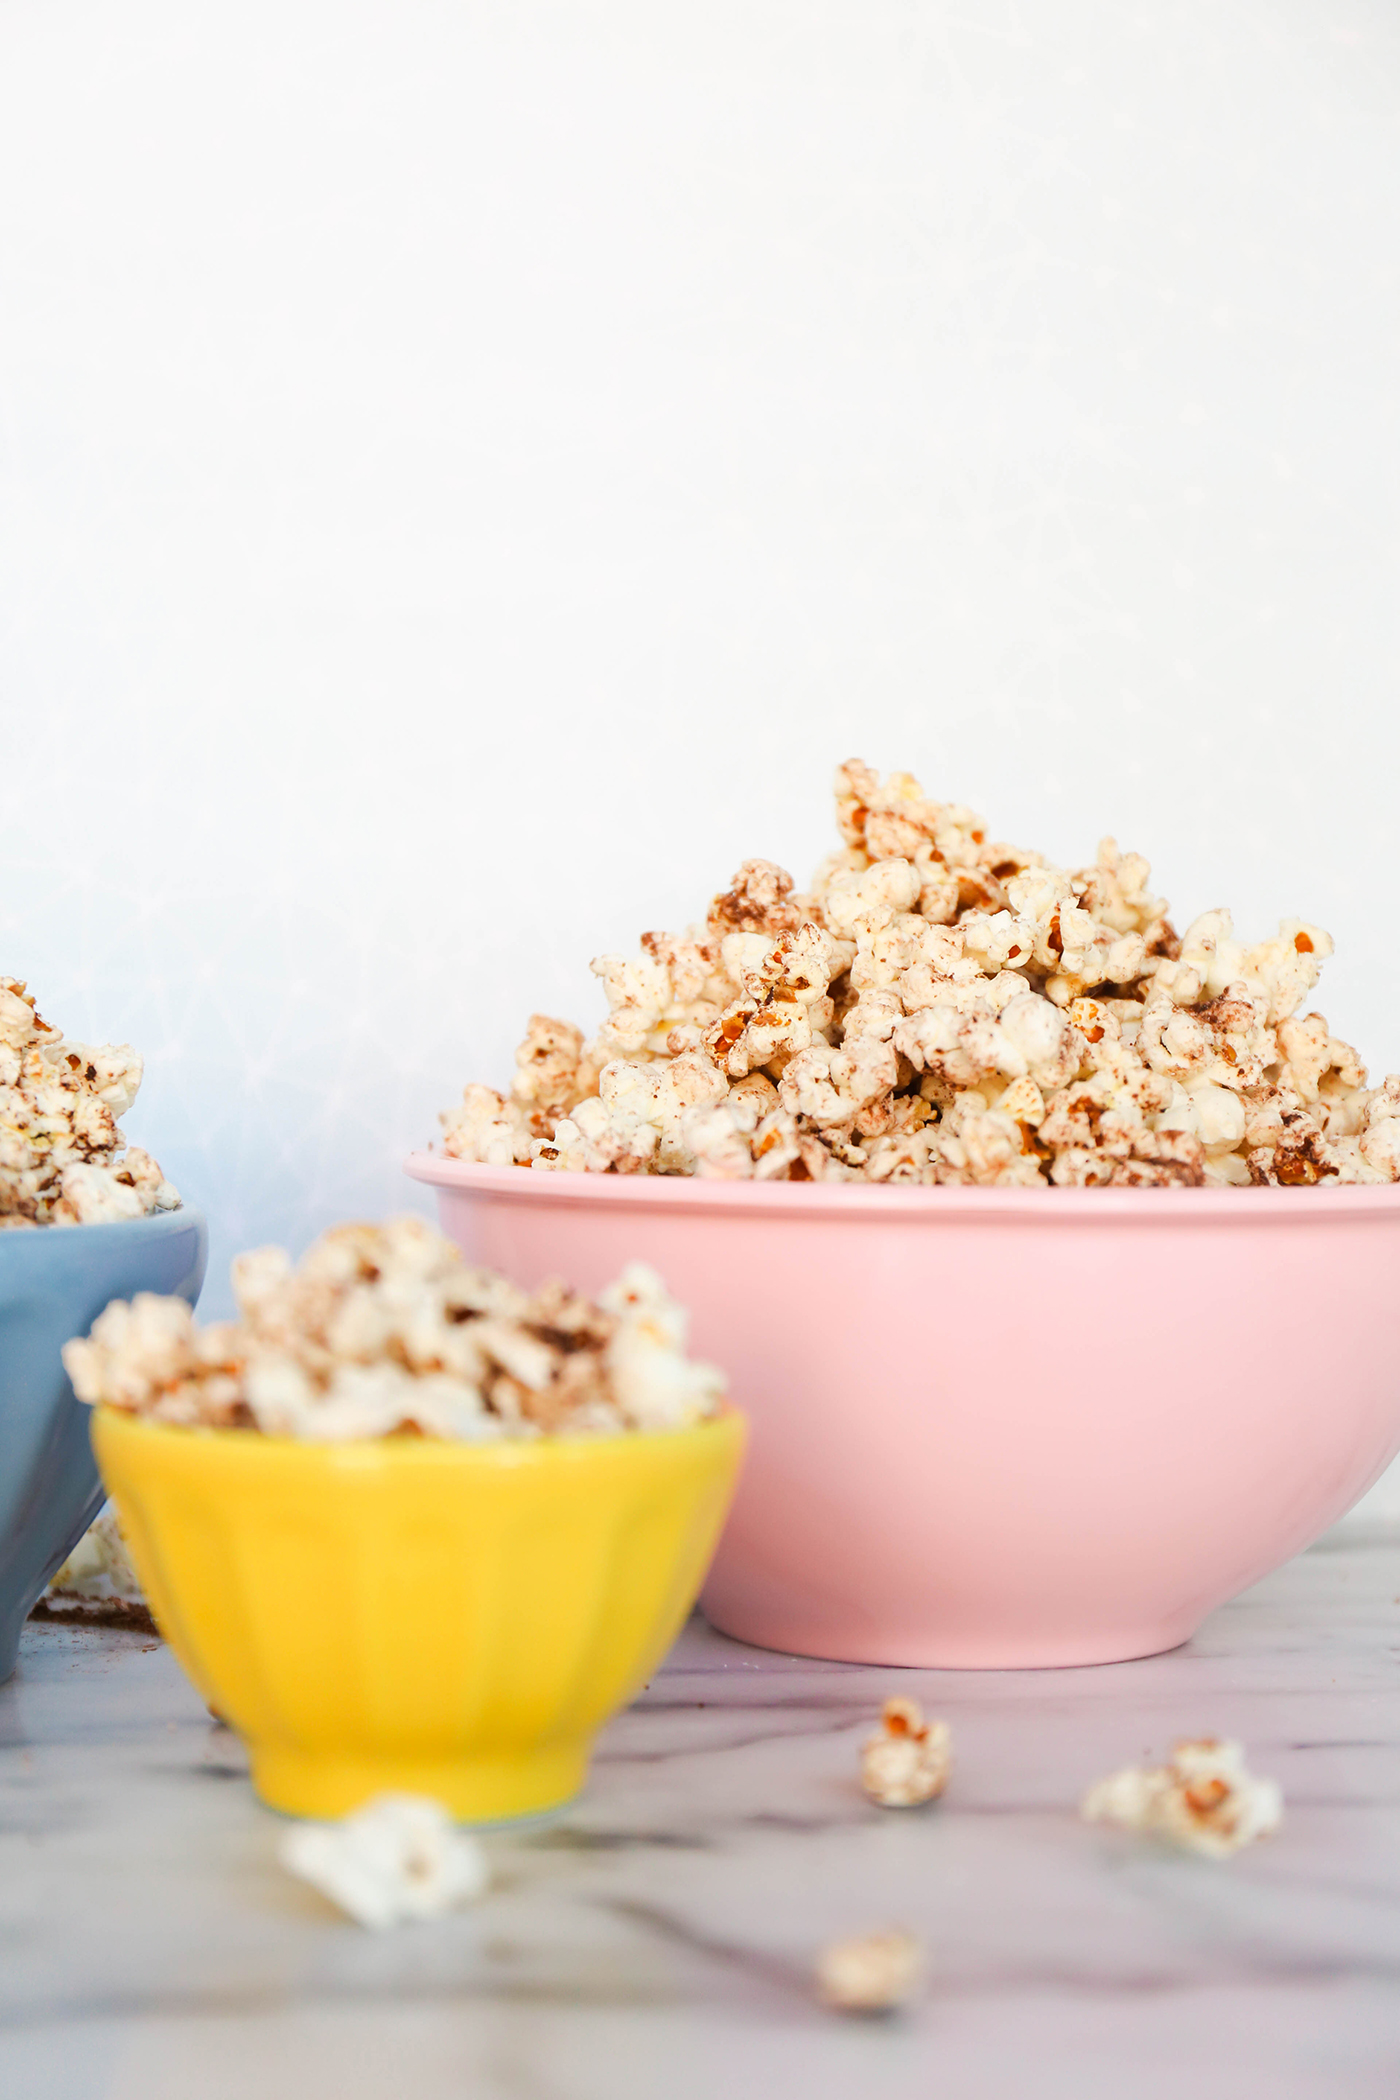 SkinnyPop Popcorn Recipe with Apples, Pecans, and Rosemary